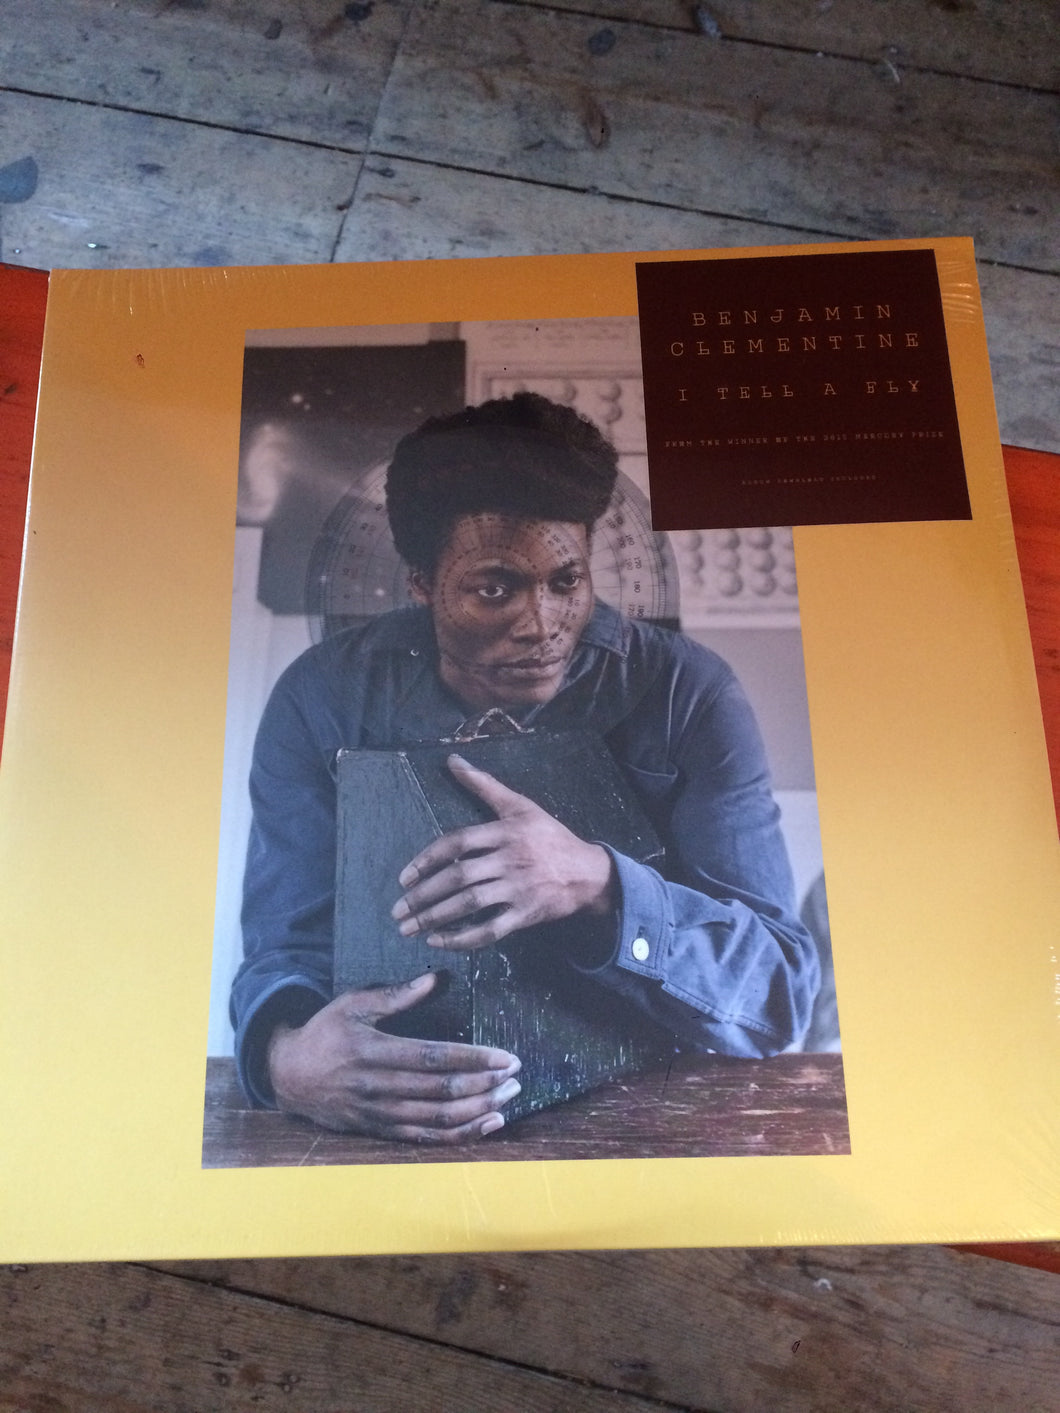 Benjamin Clementine - I Tell A Fly